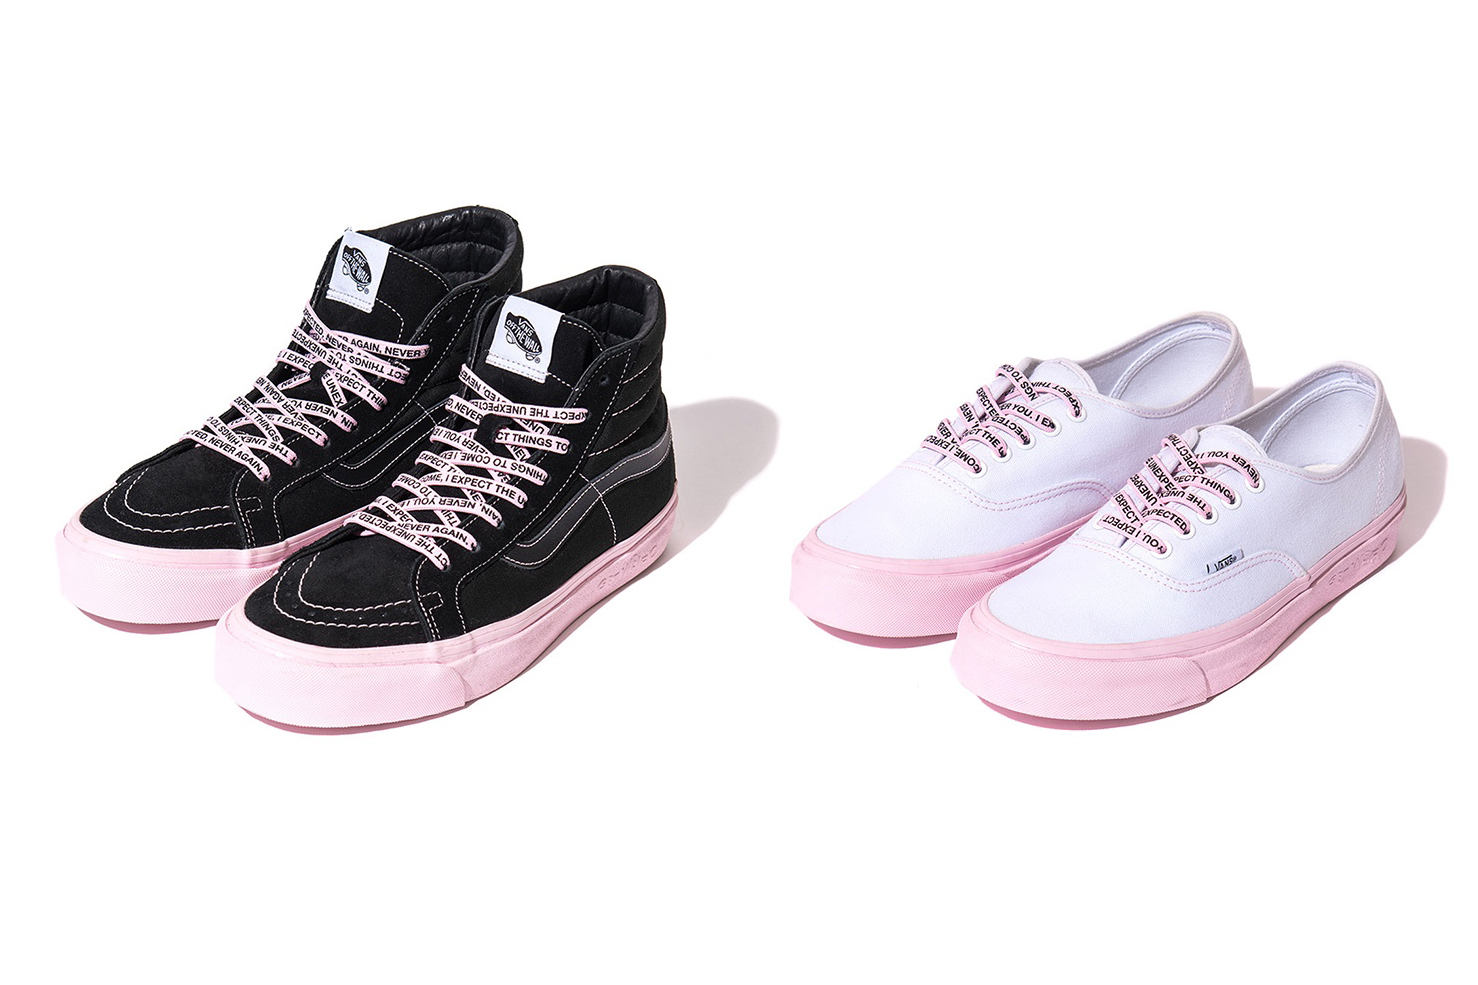 The Anti Social Club x Vans x Dover Street Market Sneakers Are Finally – PAUSE Online | Men's Fashion, Street Style, Fashion & Streetwear